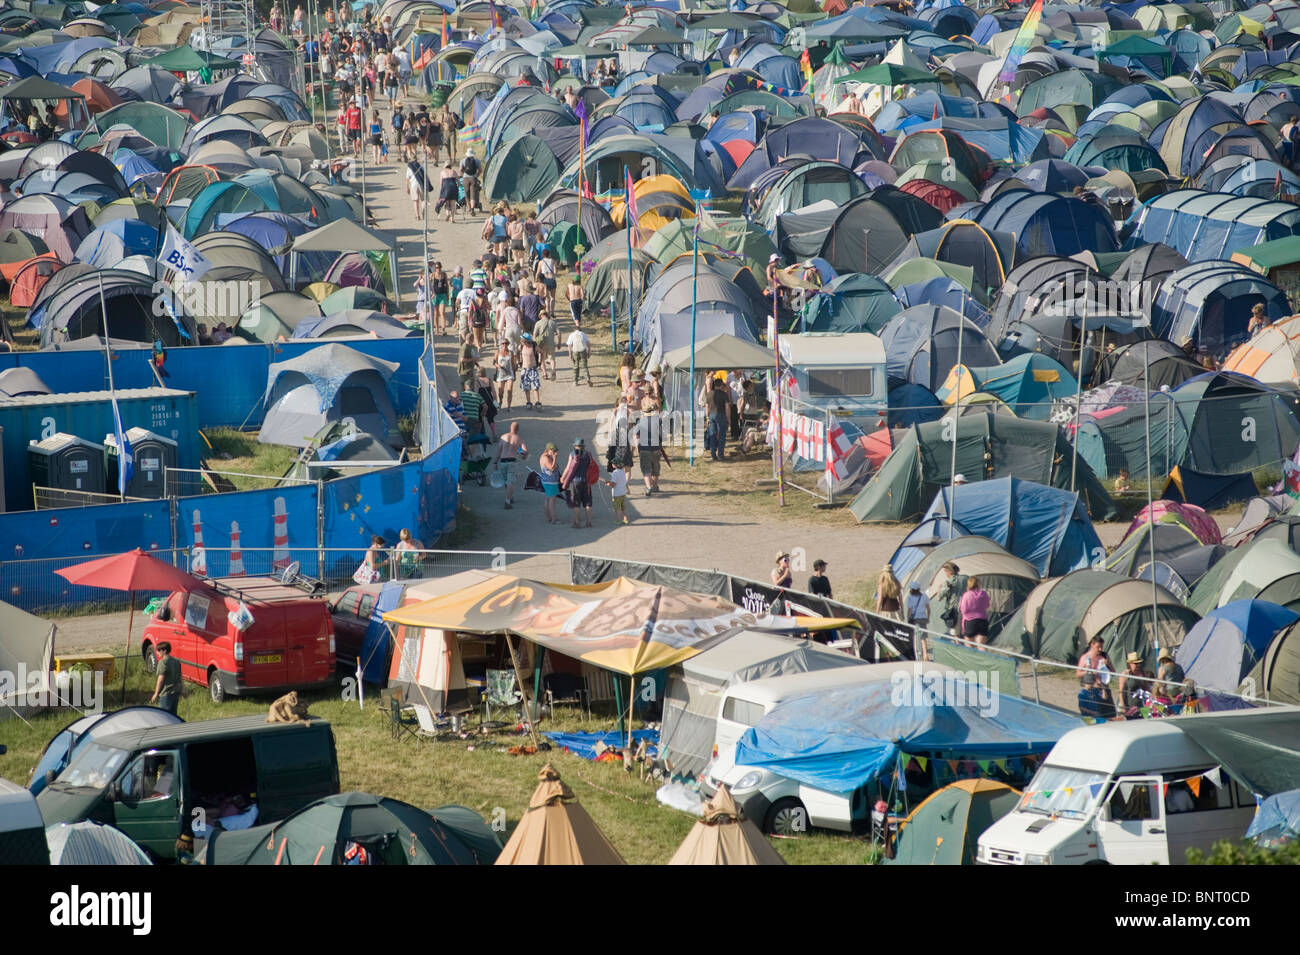 Overview of a camping area at the Glastonbury Festival, Pilton, Somerset, England. Stock Photo